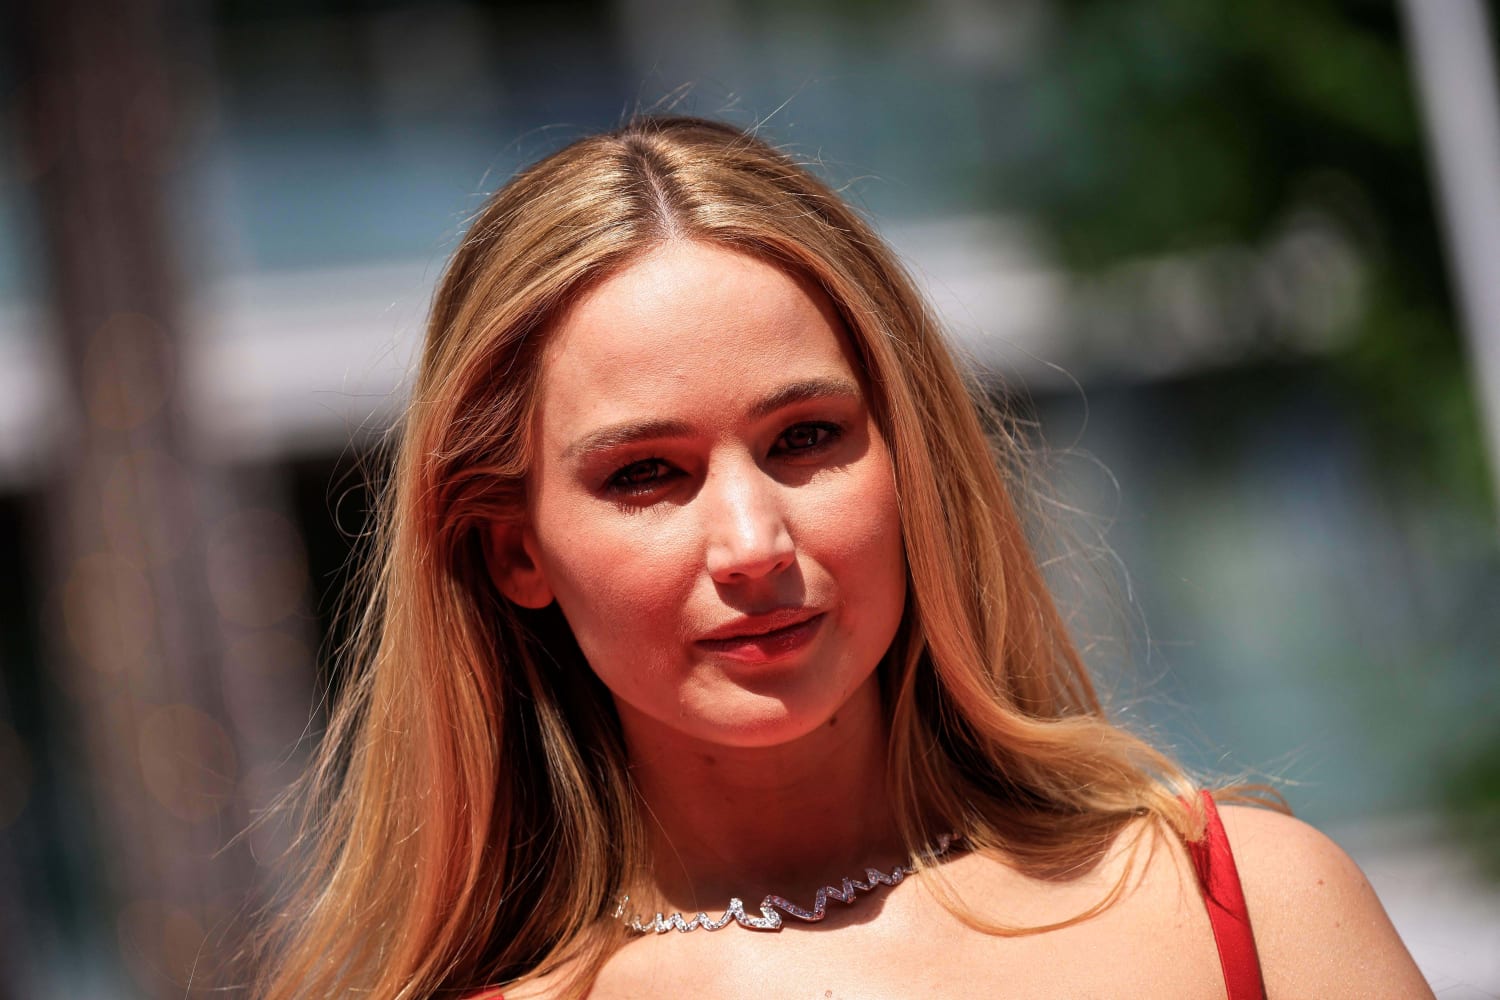 Jennifer Lawrence-produced Afghan documentary premieres at Cannes – Alokito Mymensingh 24